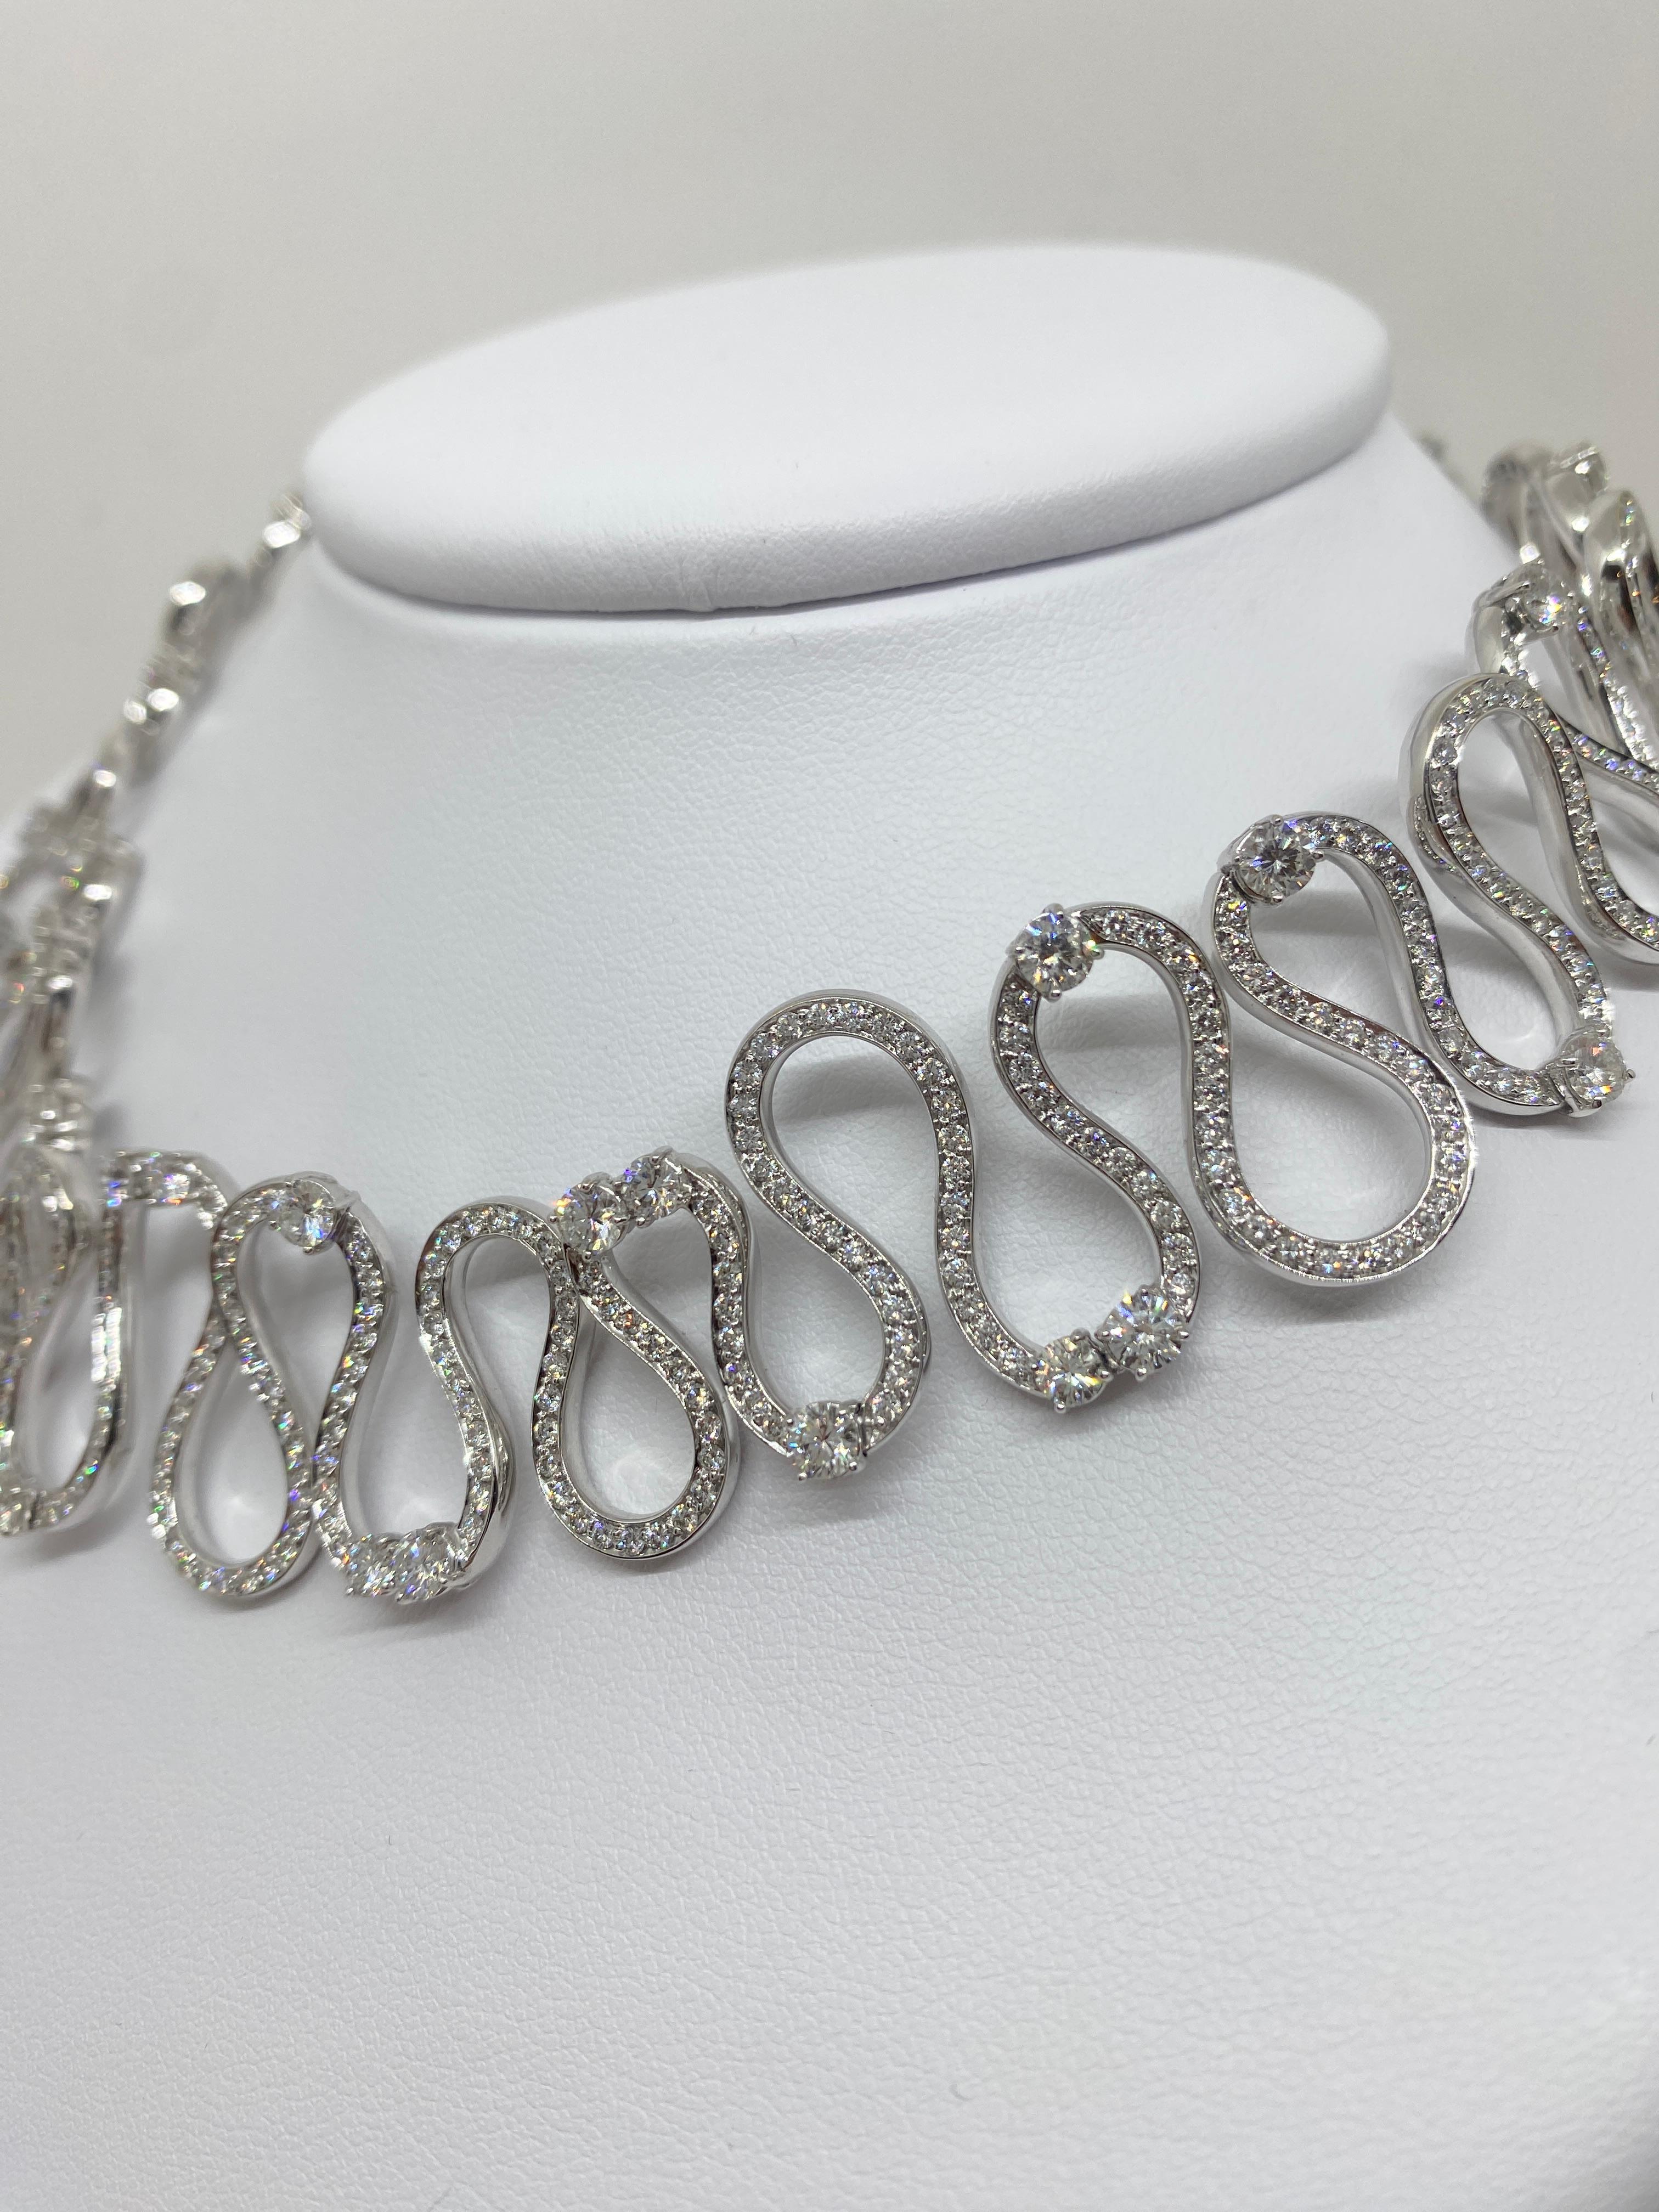 Women's One of a Kind 18 Kt White Gold Cantamessa Queen Necklace 15.64 Ct White Diamonds For Sale